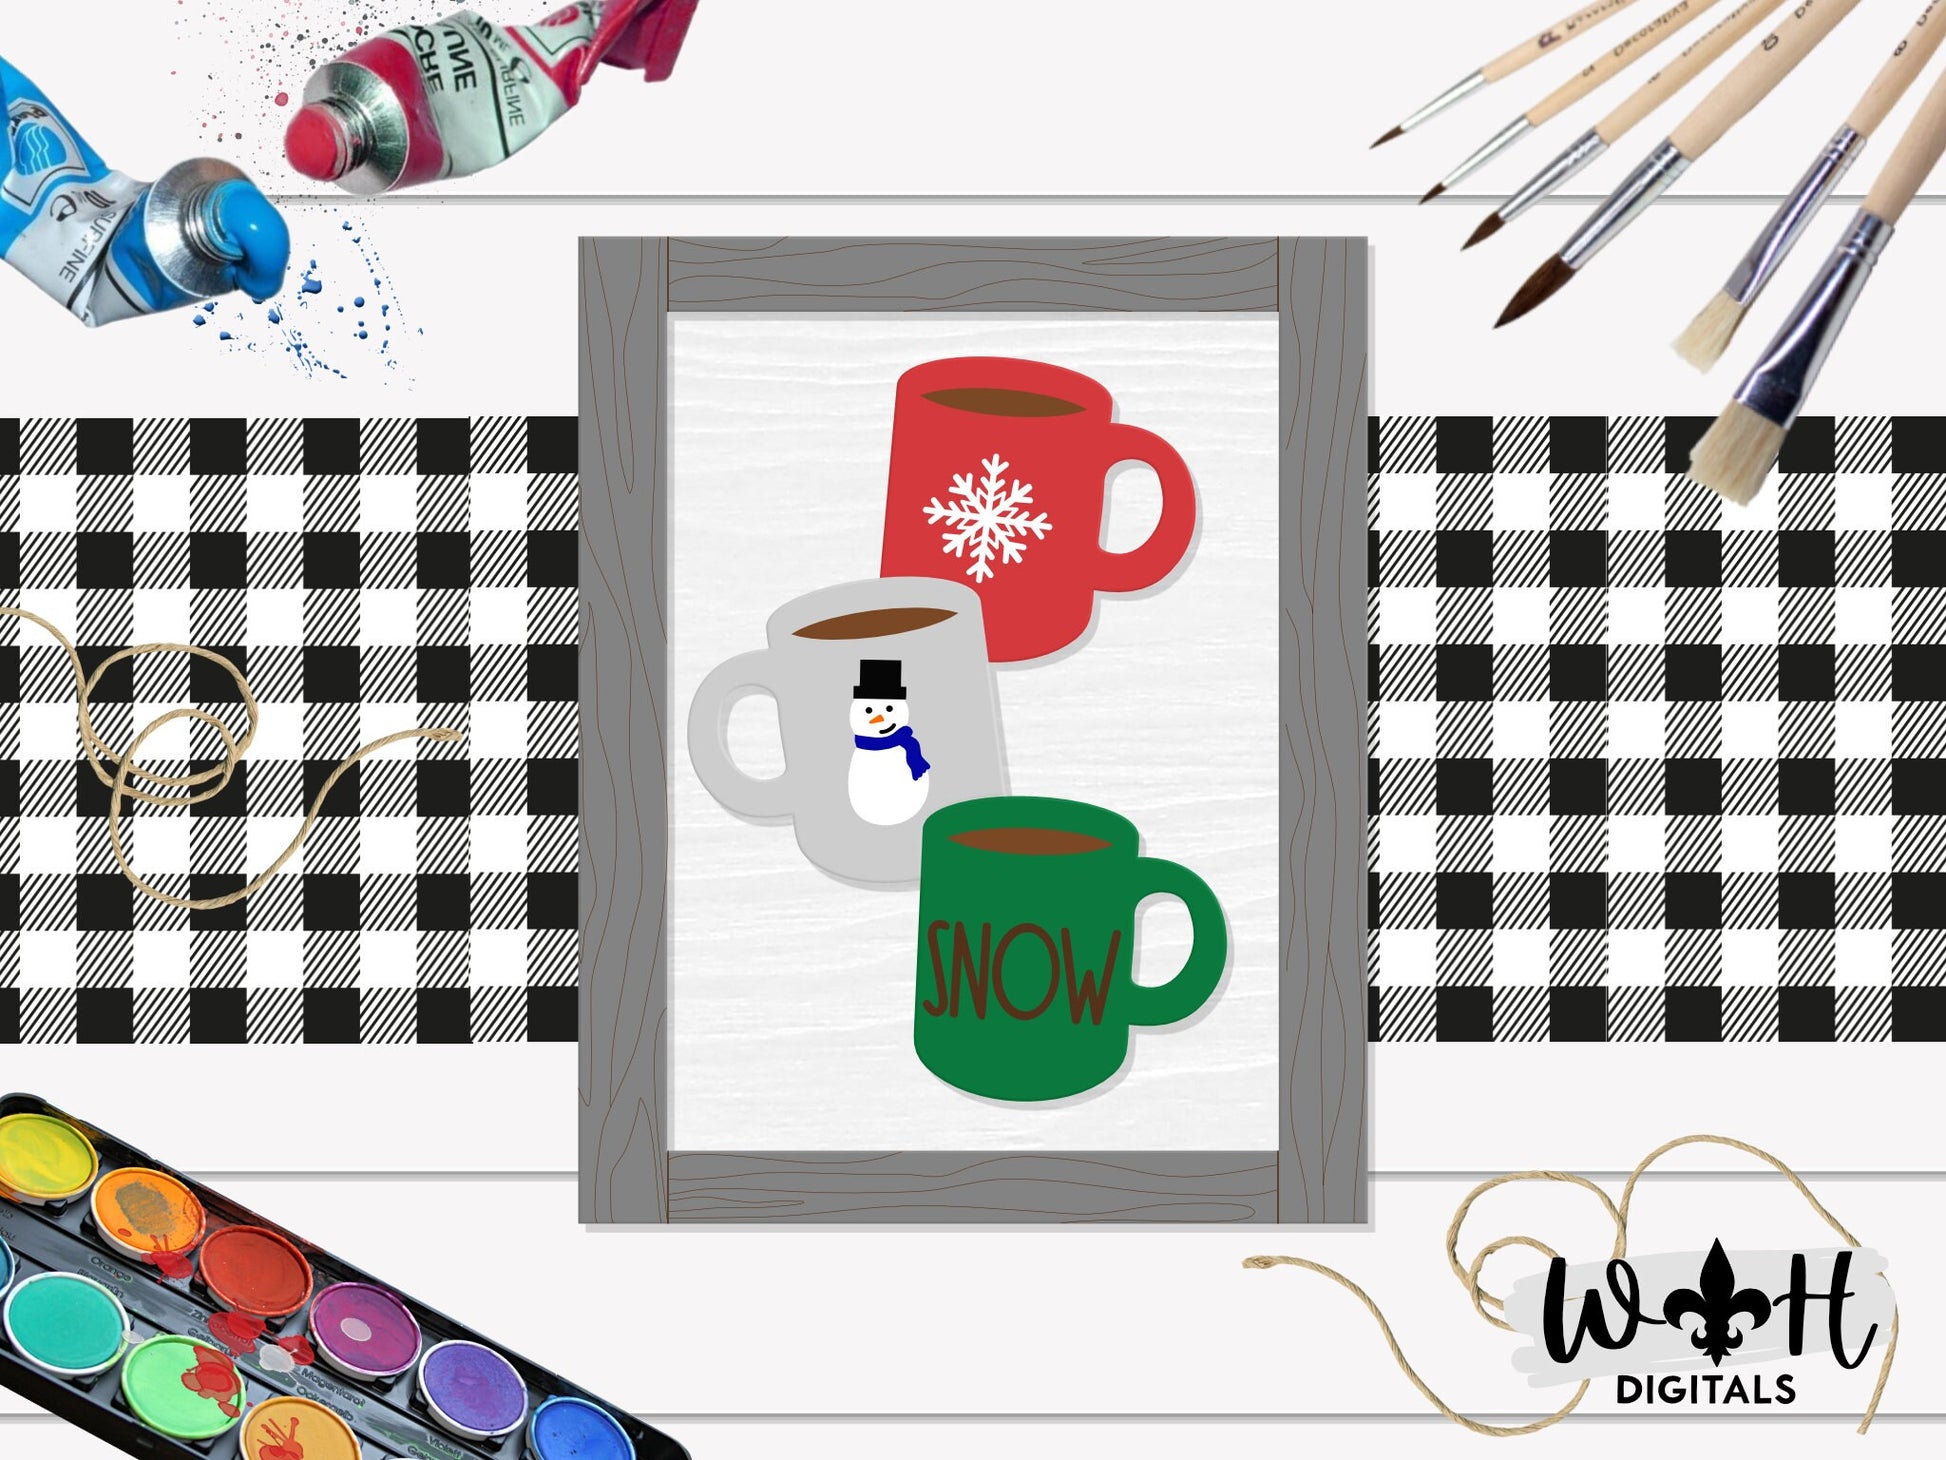 Snow Stacked Coffee Mugs Farmhouse Frame Sign - Winter Tiered Tray Decor and DIY Kits - Cut File For Glowforge Lasers - Digital SVG File